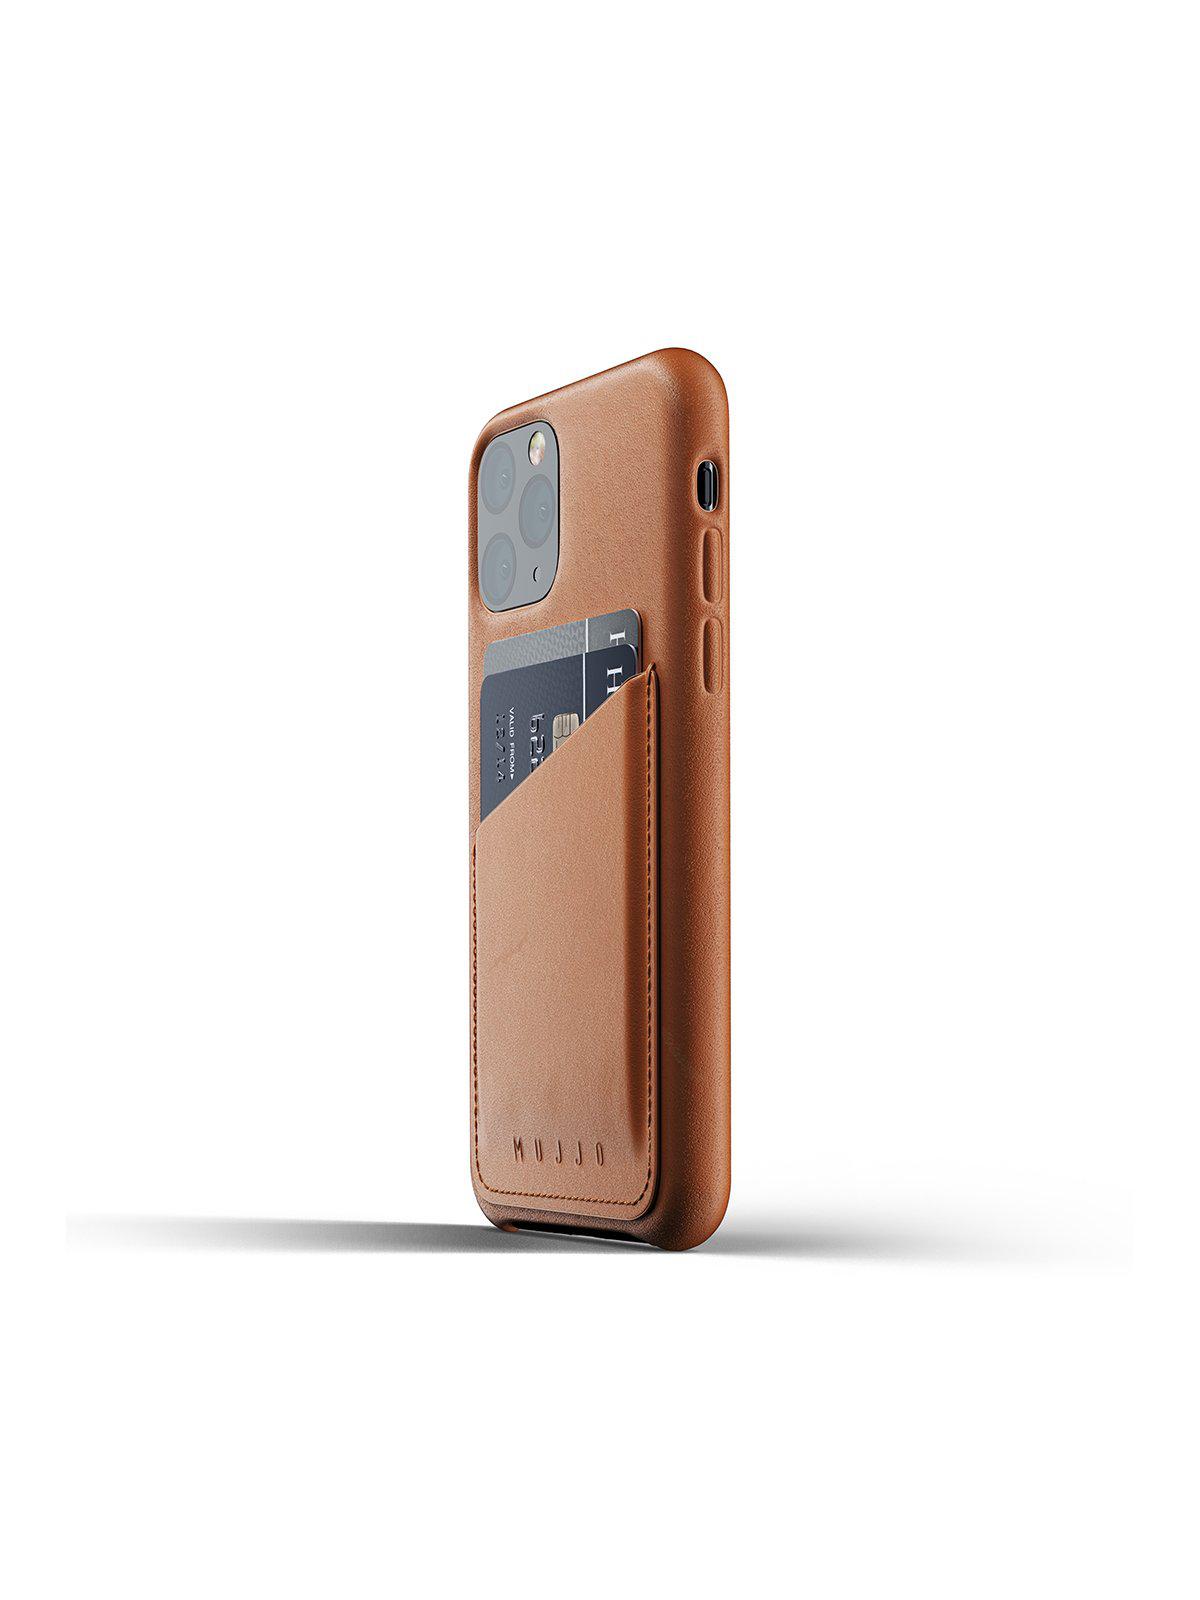 Mujjo Full Leather Wallet Case for iPhone 11 Pro Tan - MORE by Morello Indonesia